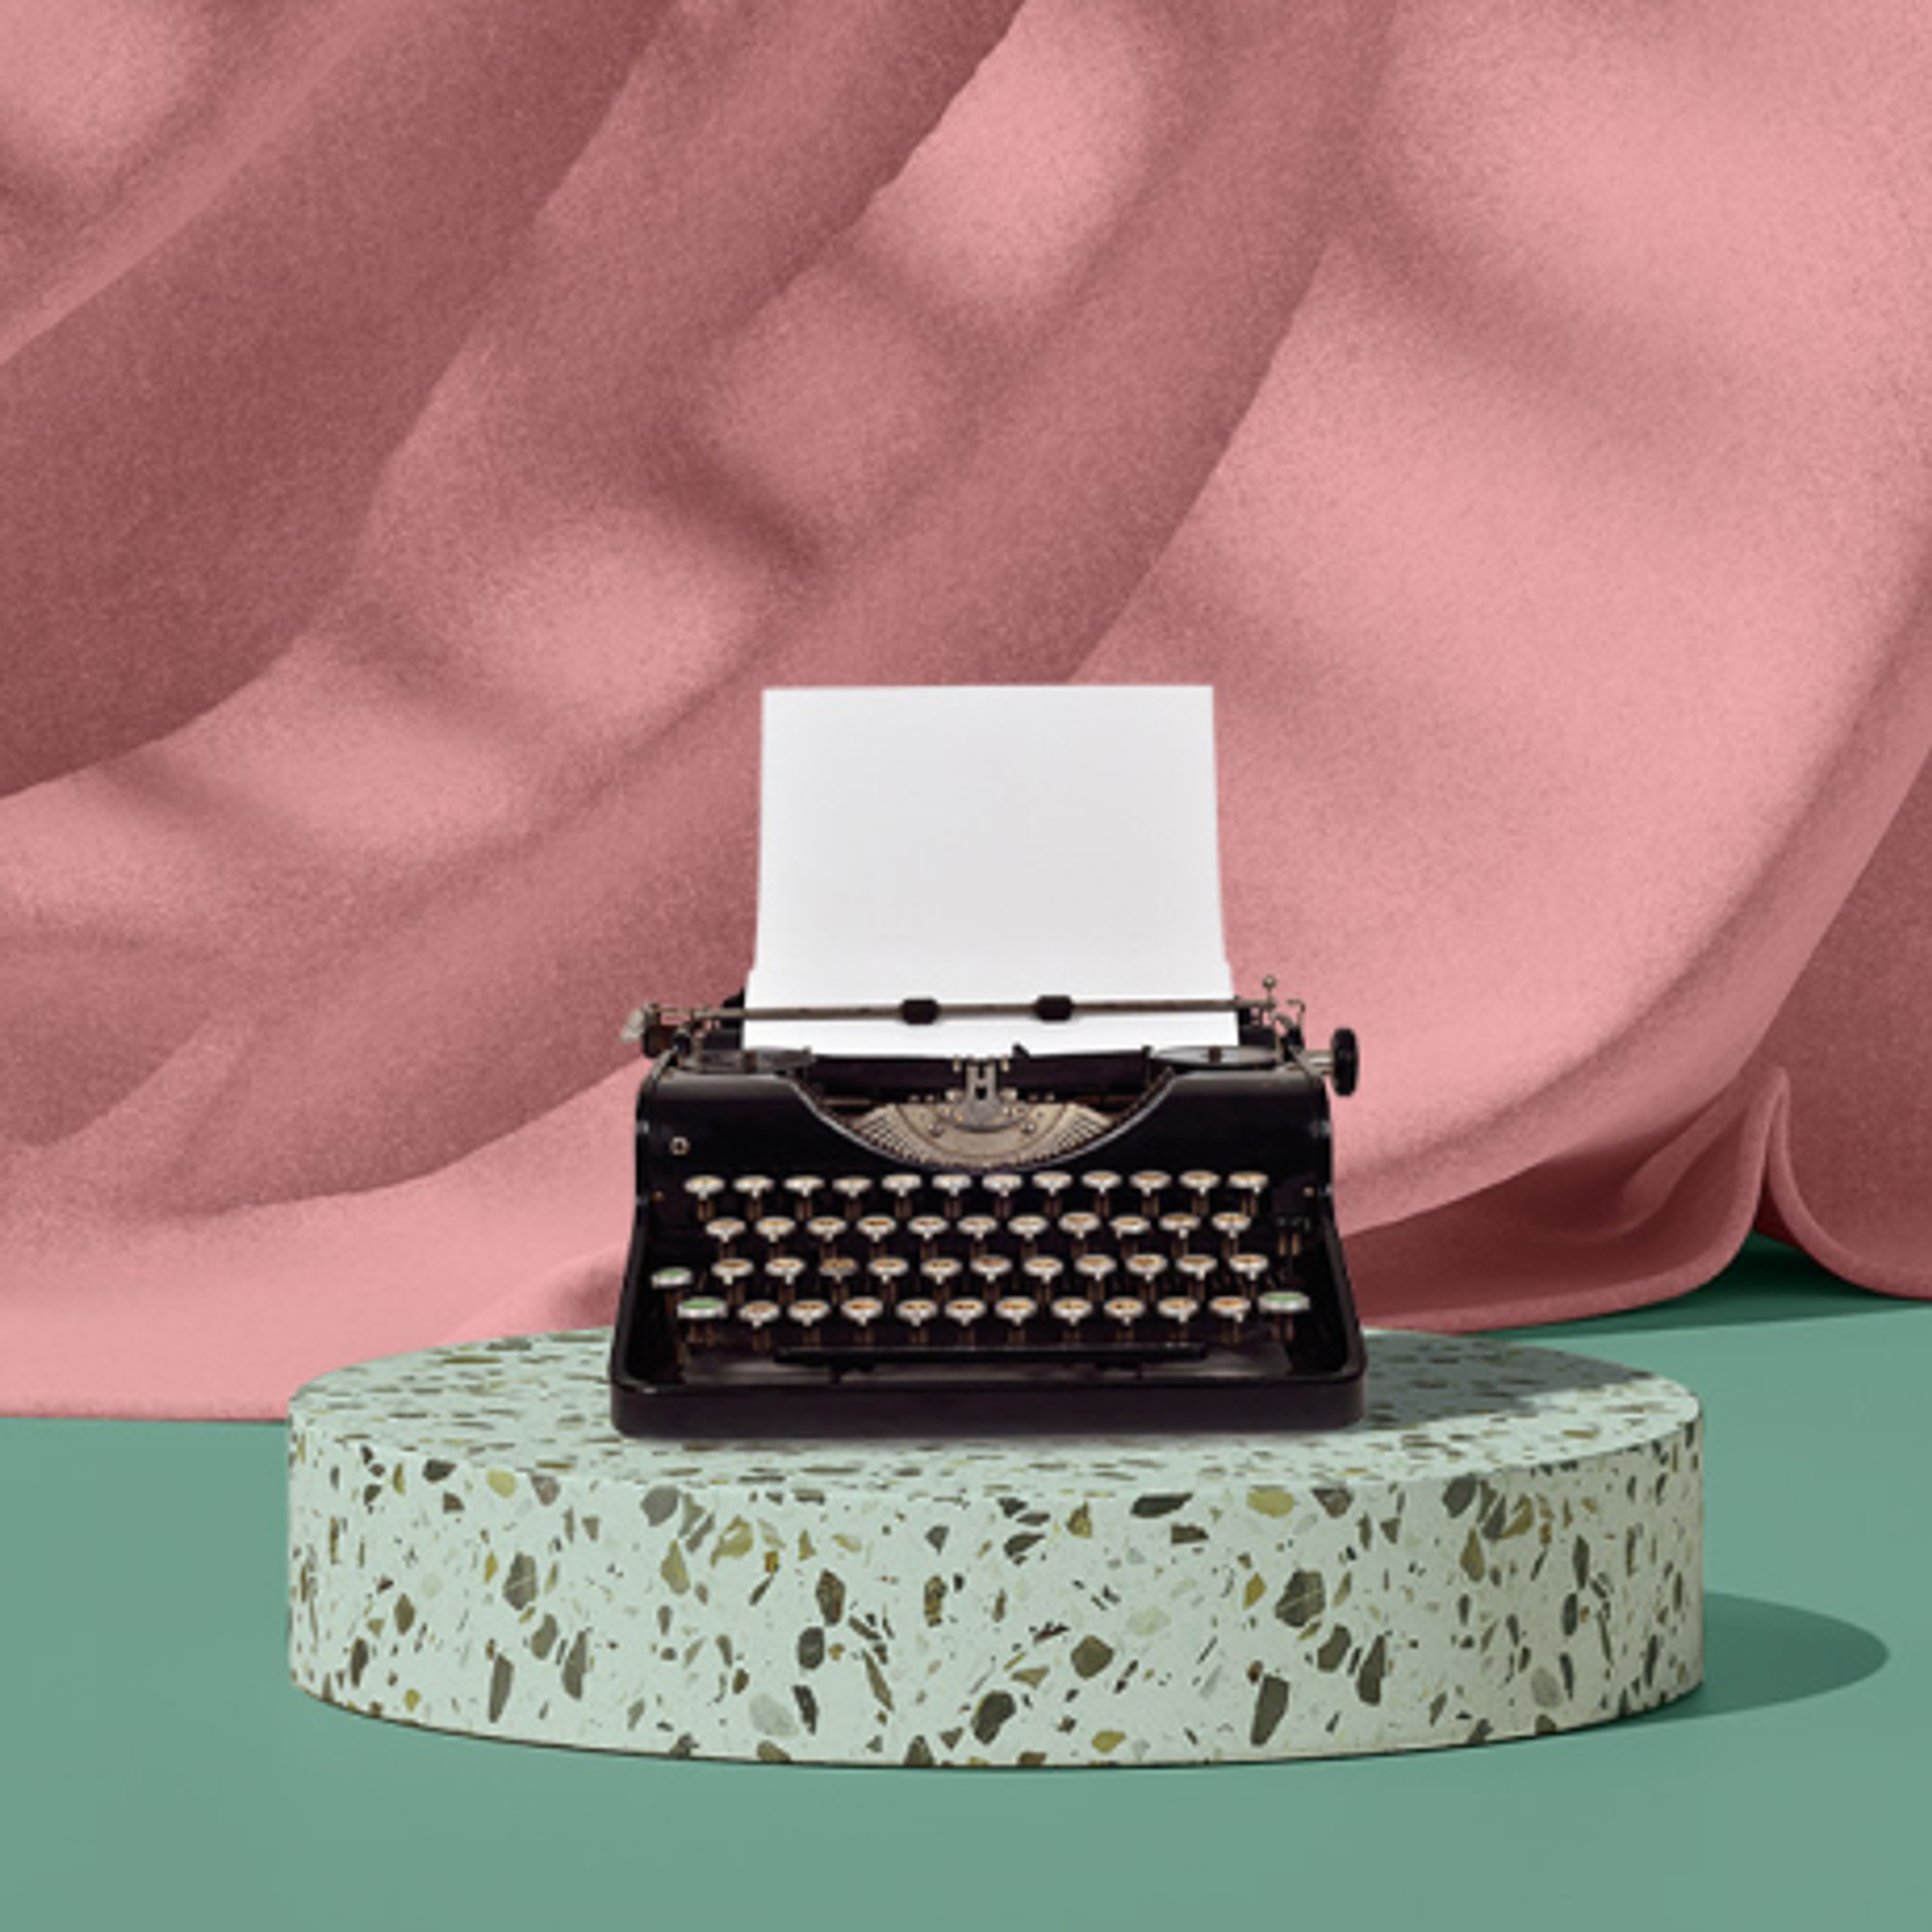 Old-fashioned typewriter with paper and pink curtains in the background